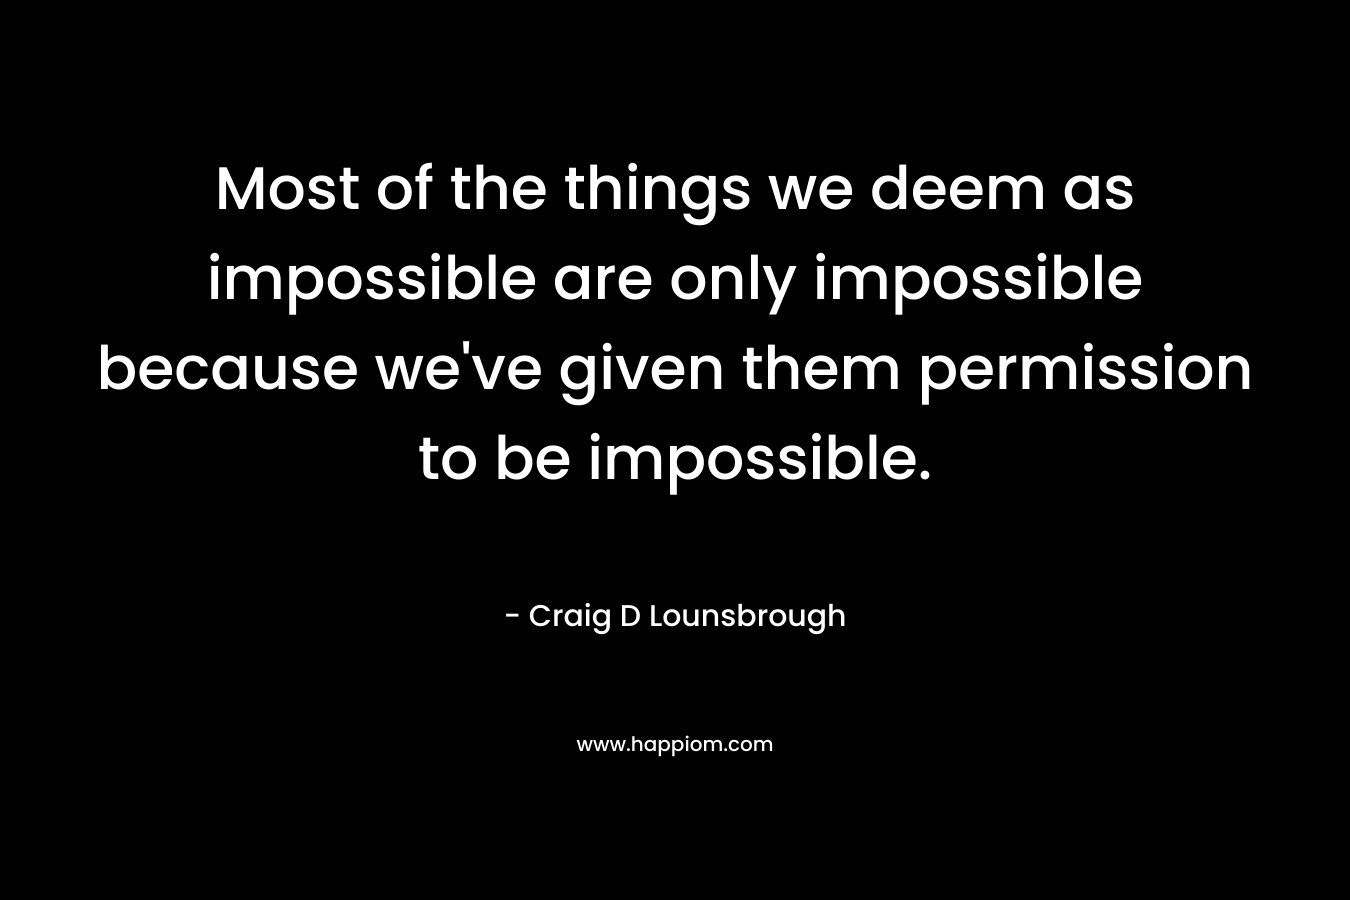 Most of the things we deem as impossible are only impossible because we've given them permission to be impossible.